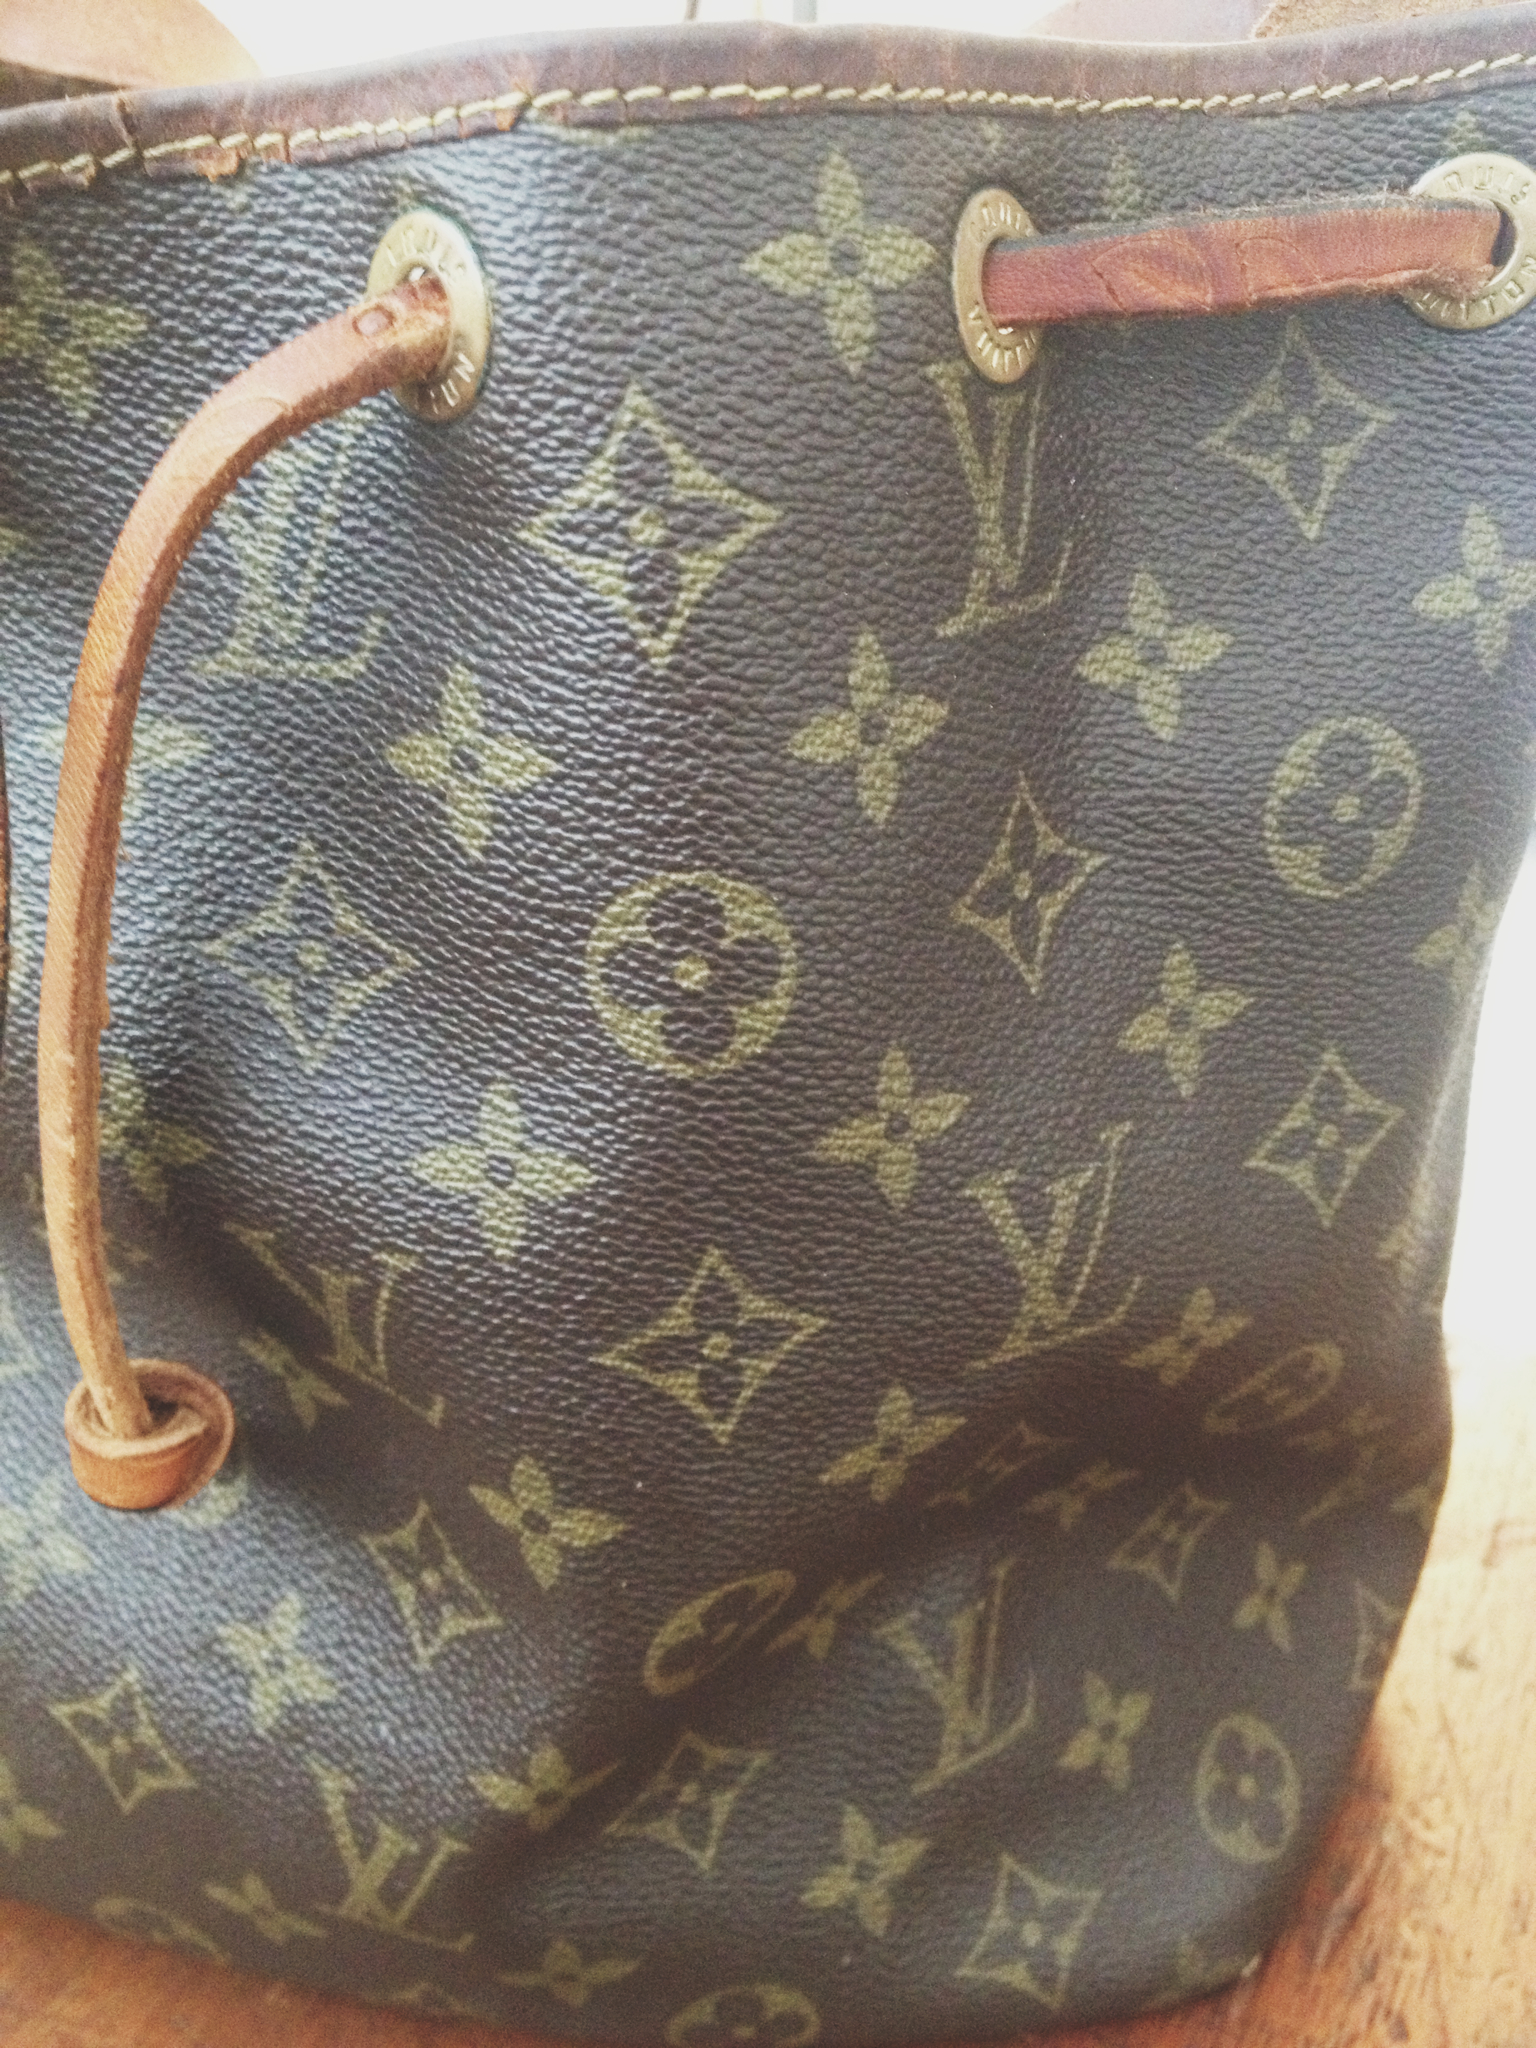 The Story of the Louis Vuitton Bag, Then and Now